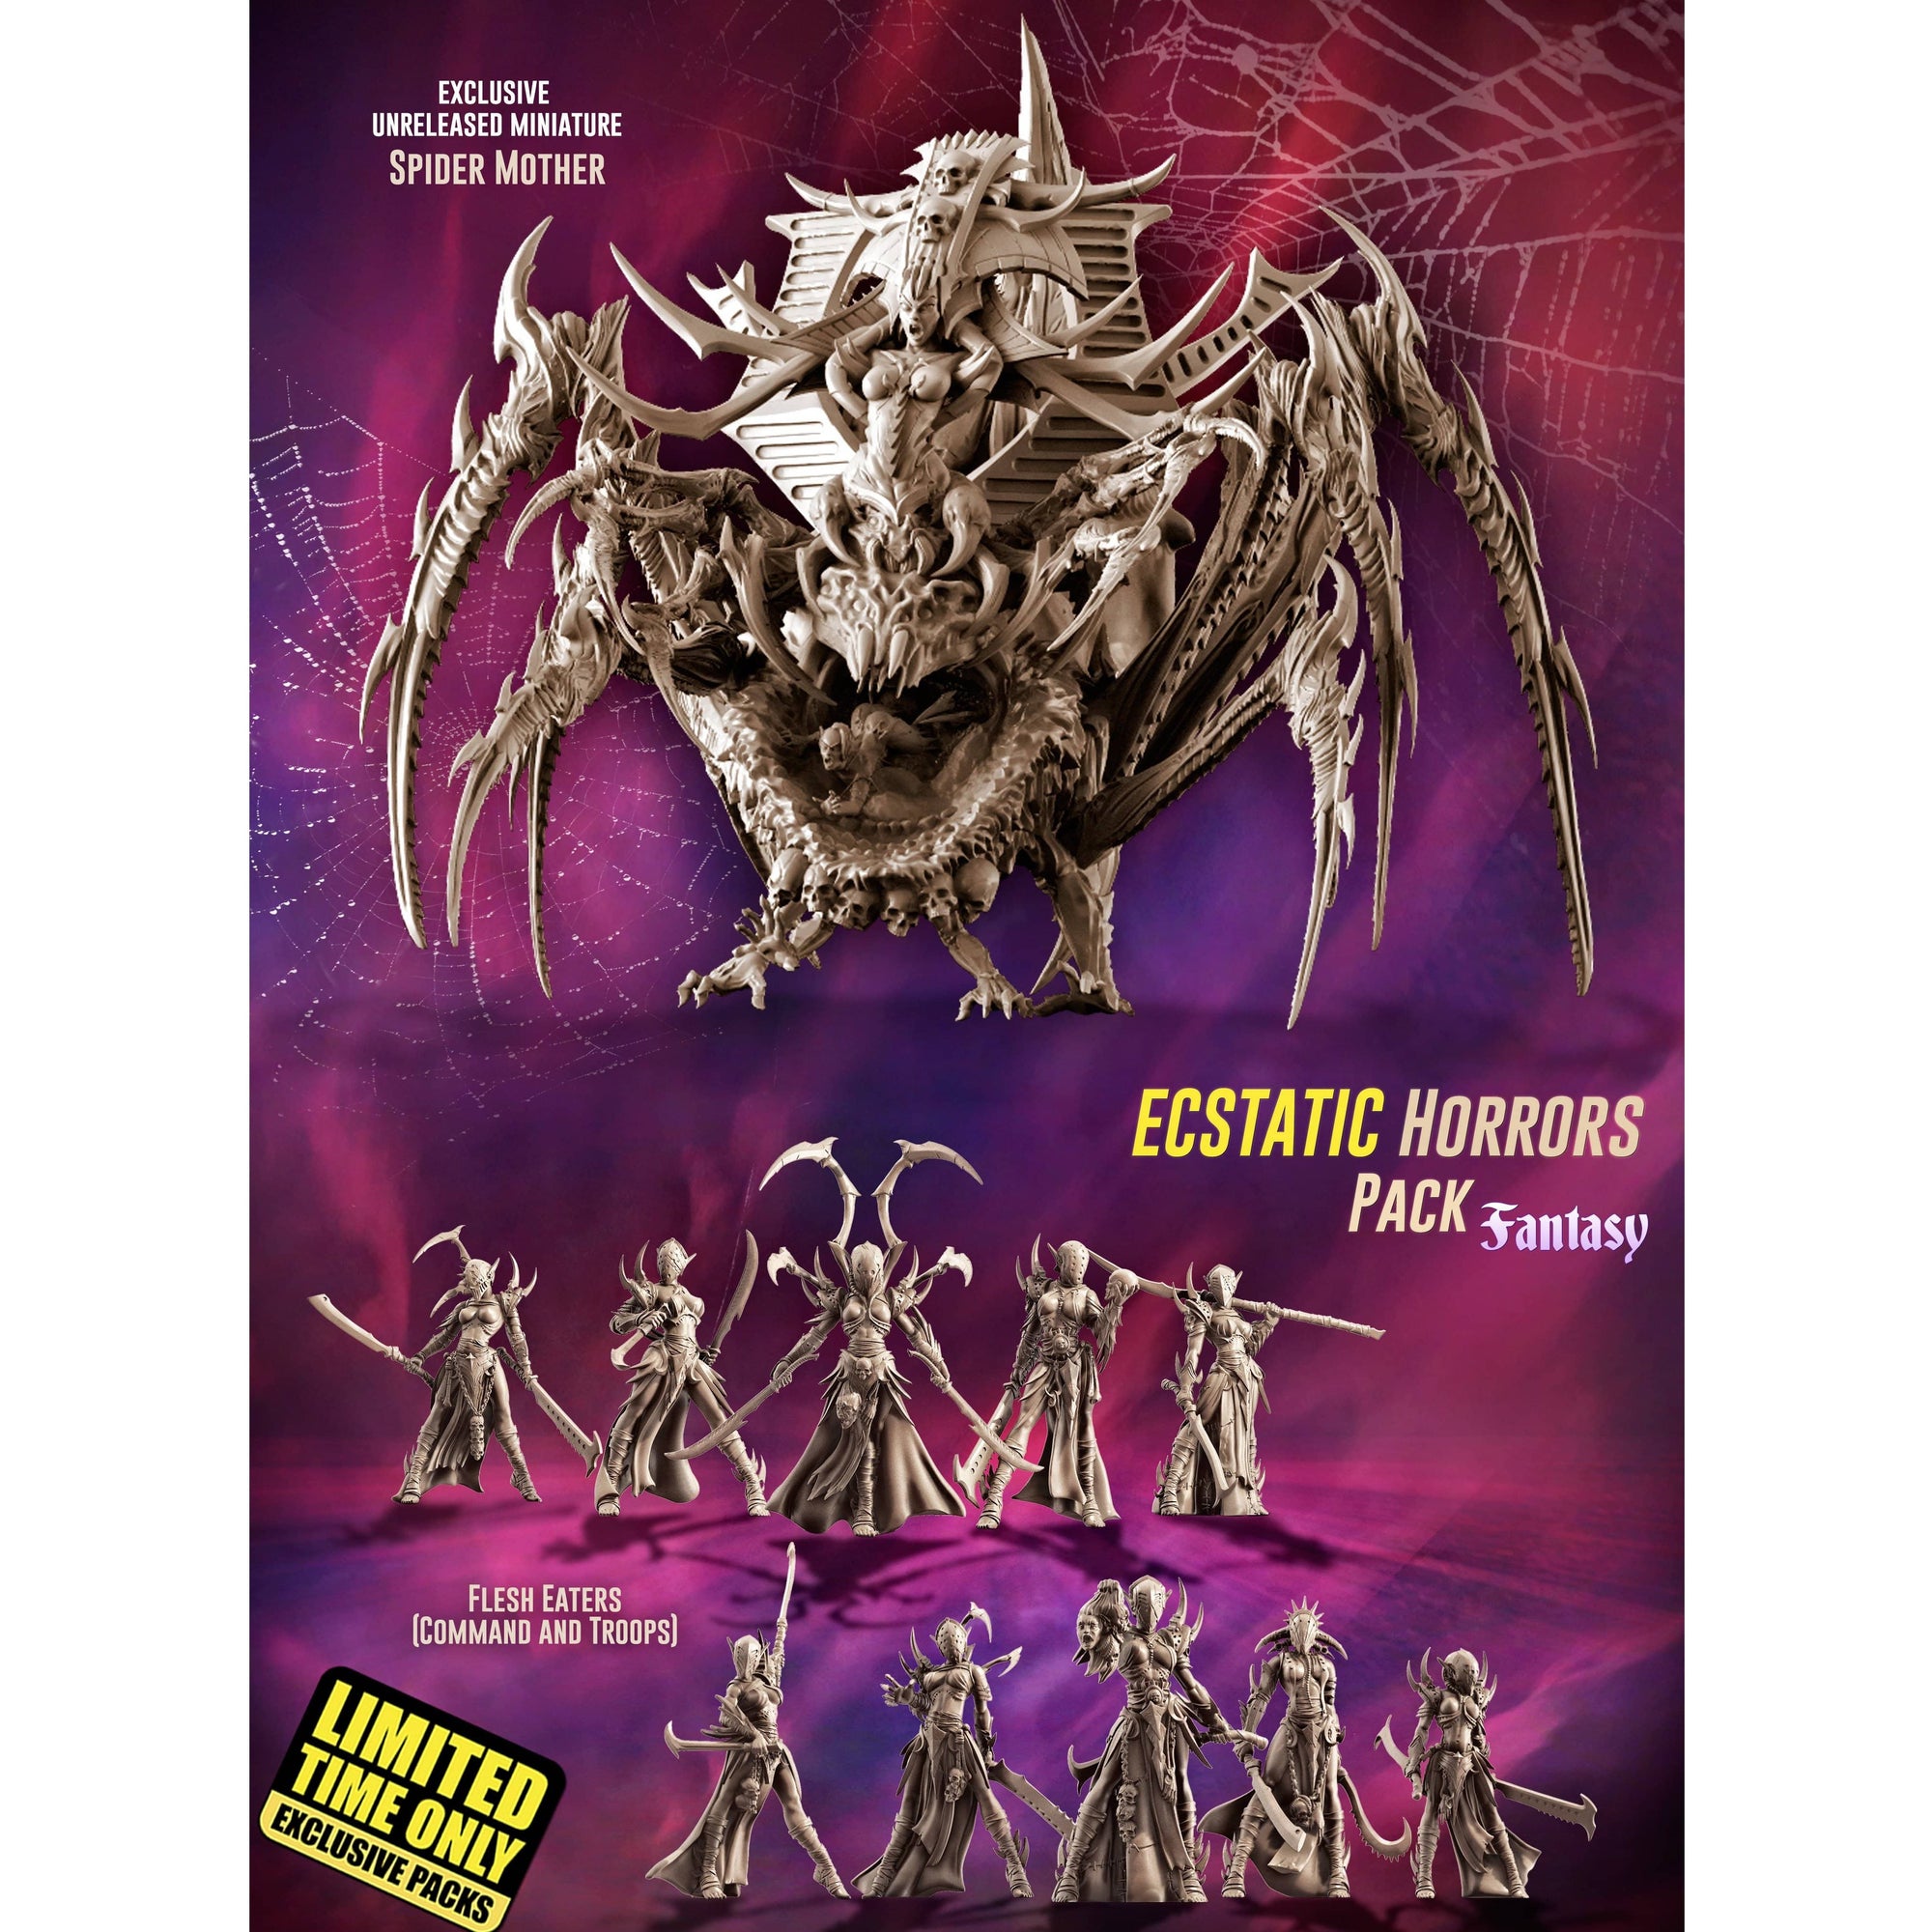 Exclusieve Ecstatic Horrors Pack (Le - Fantasy)